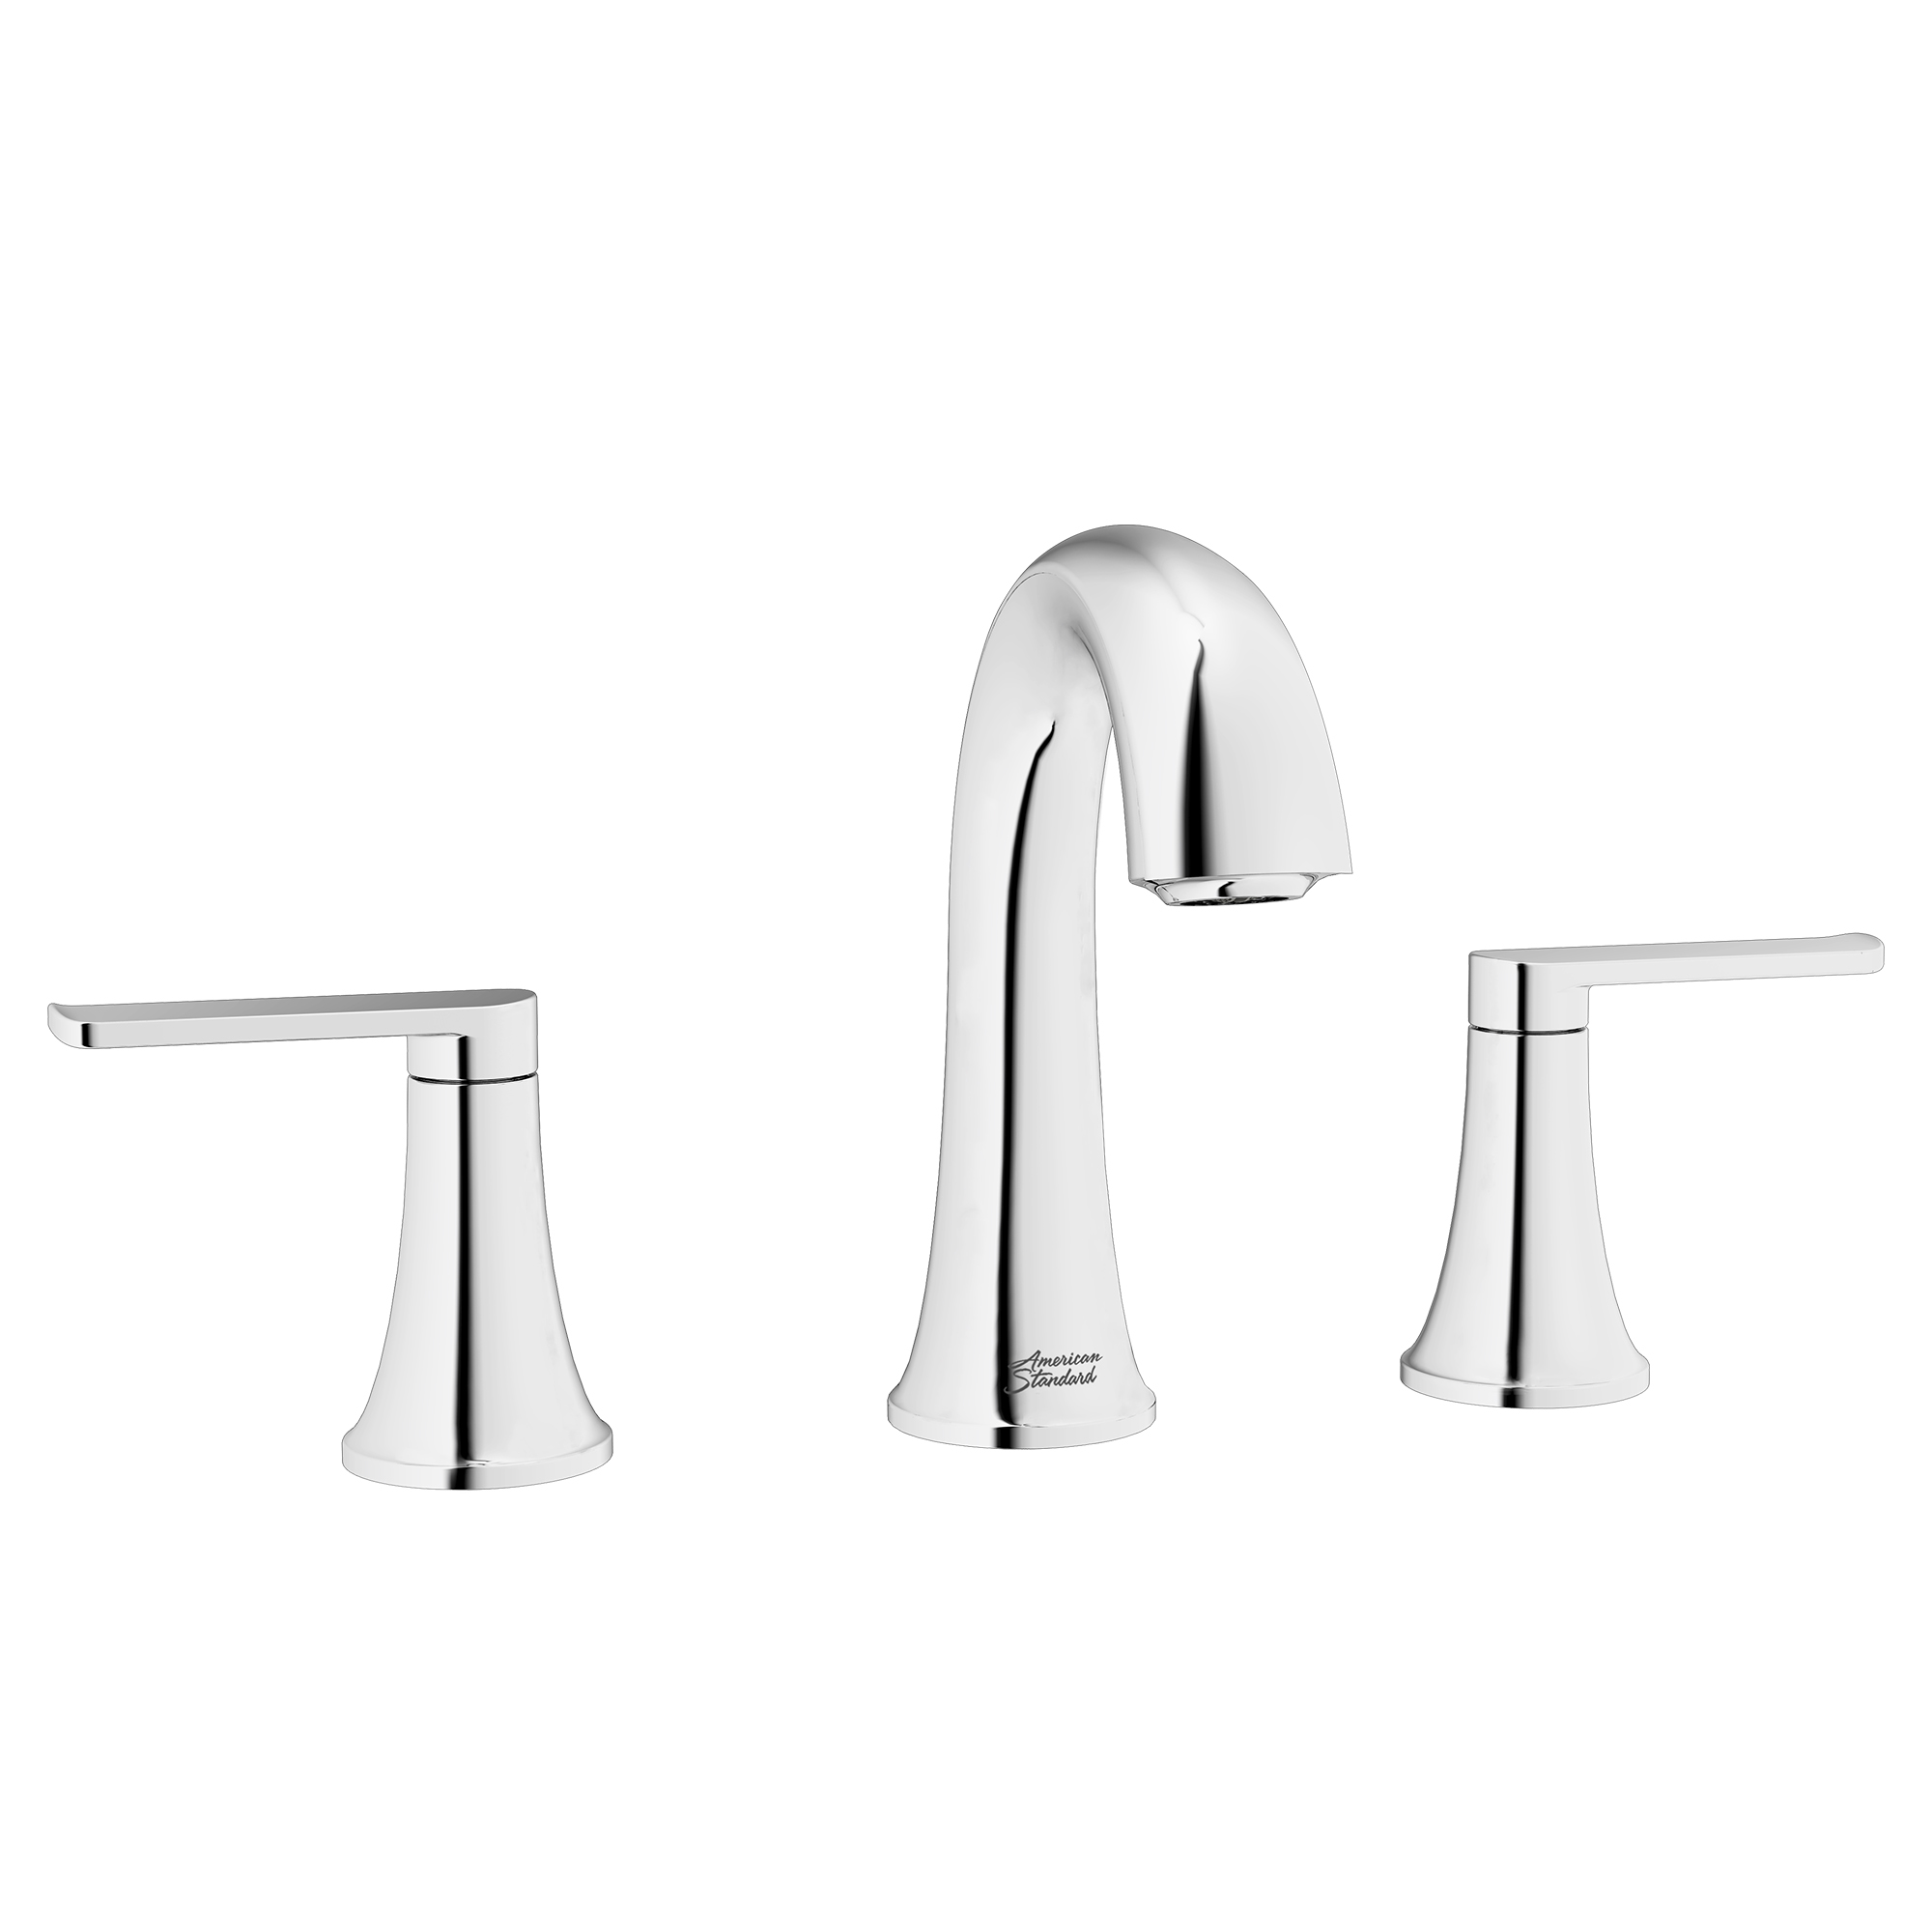 Corsham 8-Inch Widespread 2-Handle Bathroom Faucet 1.2 gpm/4.5 L/min with Lever Handle